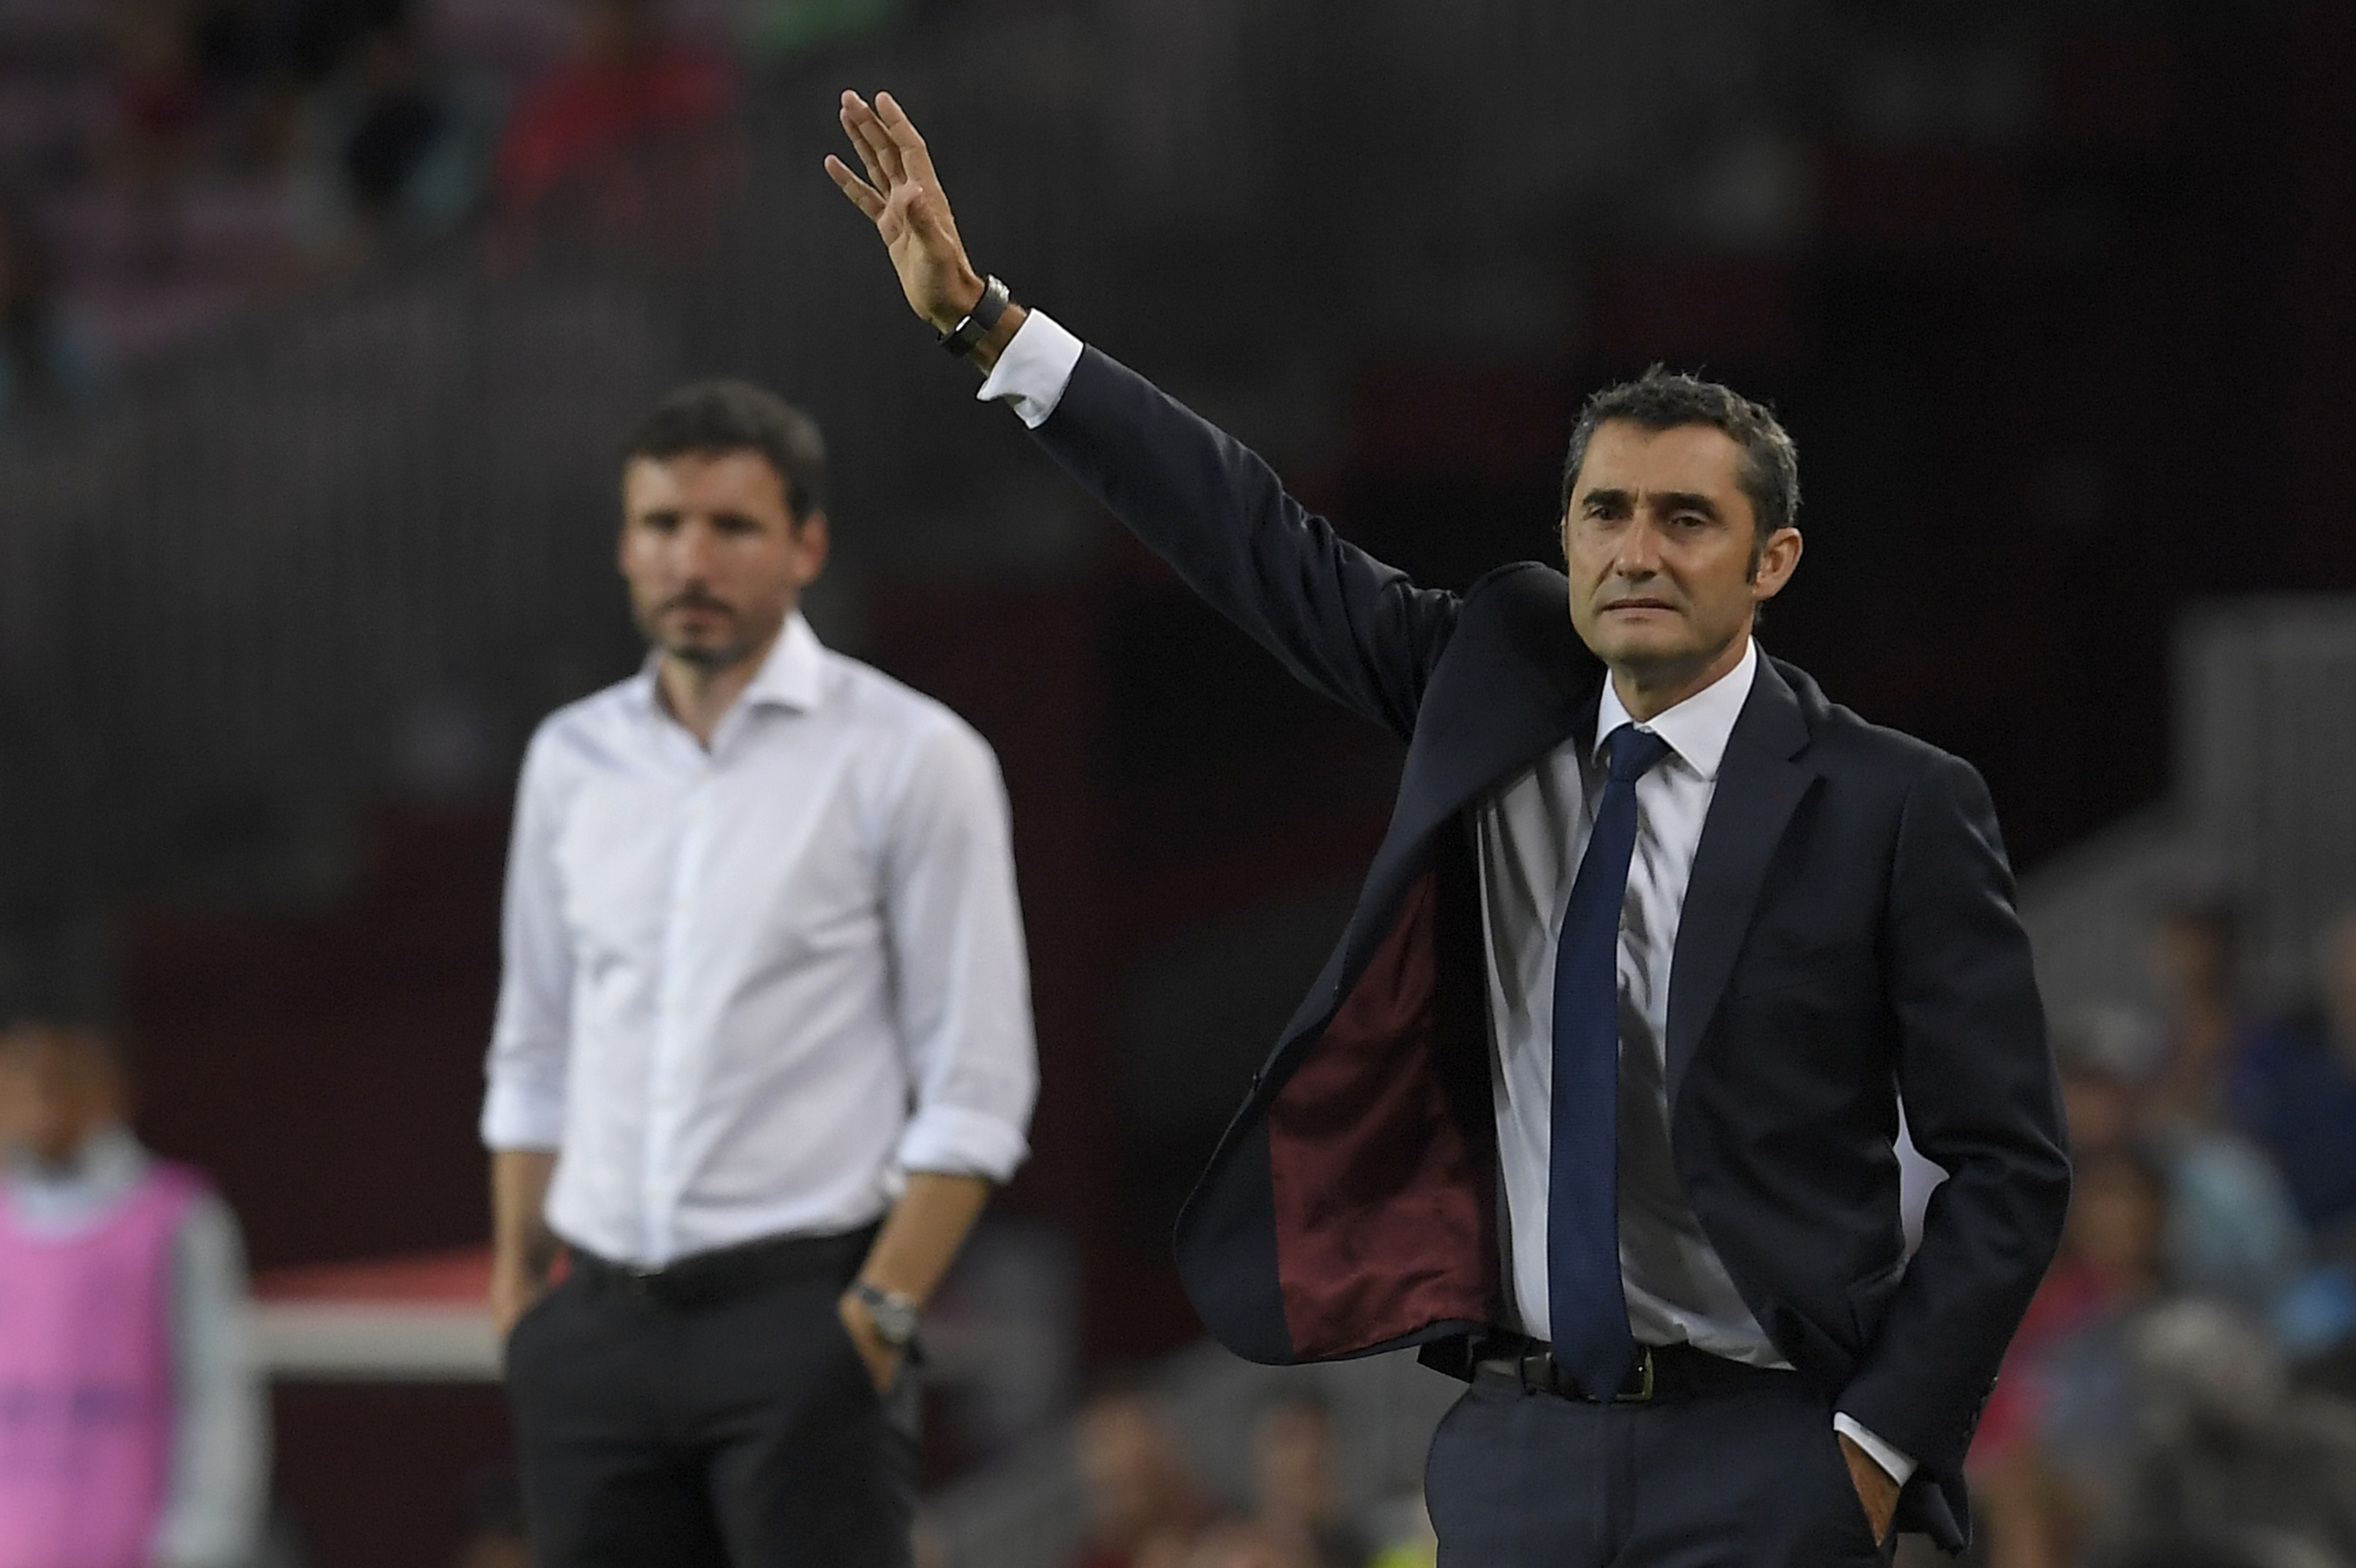 Barcelona's Spanish coach Ernesto Valverde (R) gestures next to PSV Eindhoven's Dutch coach Mark van Bommel (L) during the UEFA Champions' League group B football match FC Barcelona against PSV Eindhoven at the Camp Nou stadium in Barcelona on September 18, 2018. (Photo by LLUIS GENE / AFP)        (Photo credit should read LLUIS GENE/AFP/Getty Images)